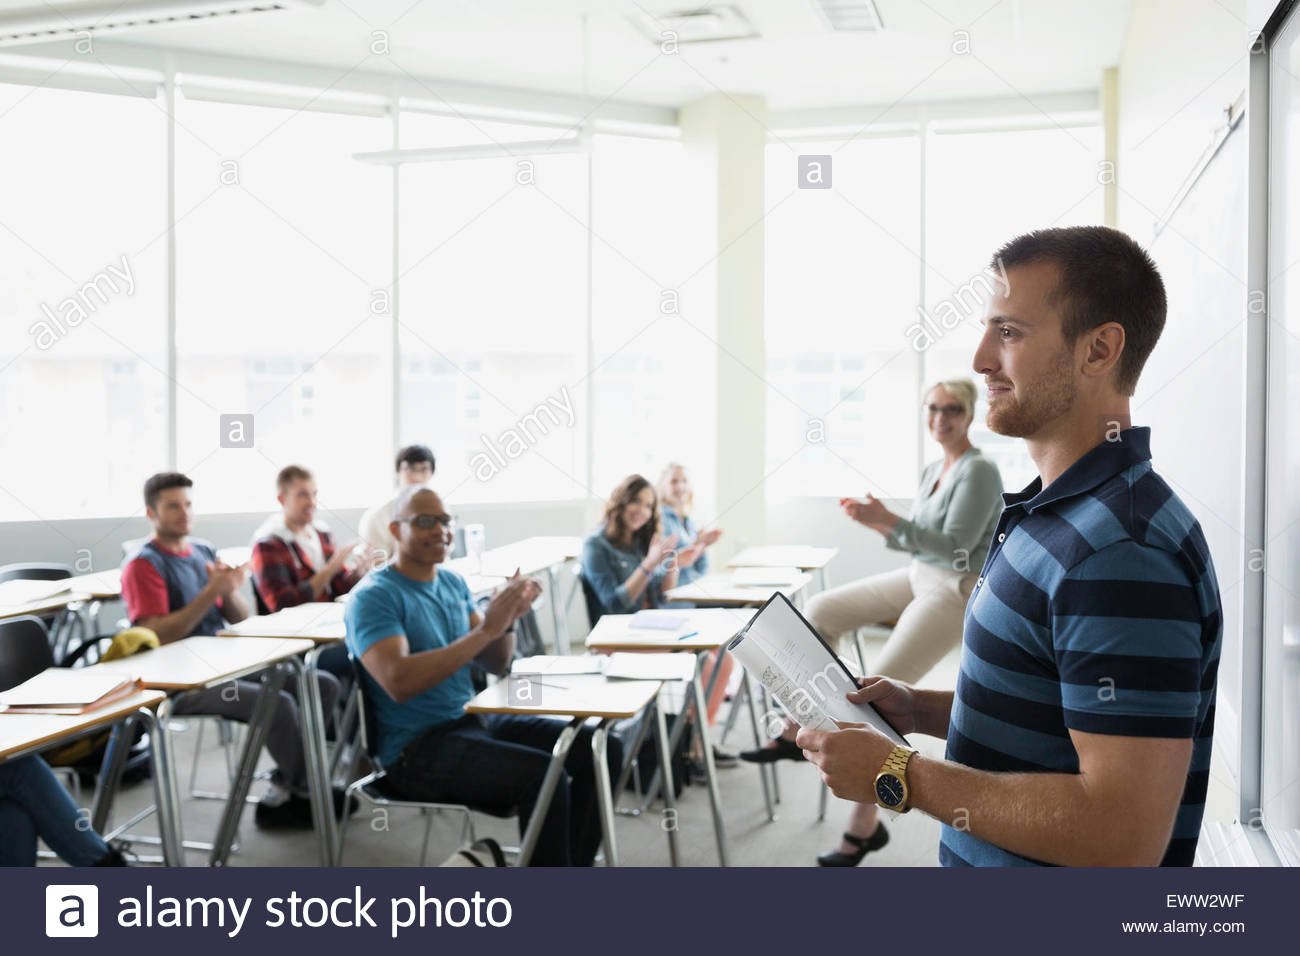 Professor and classmates clapping college student giving presentation Stock Photo